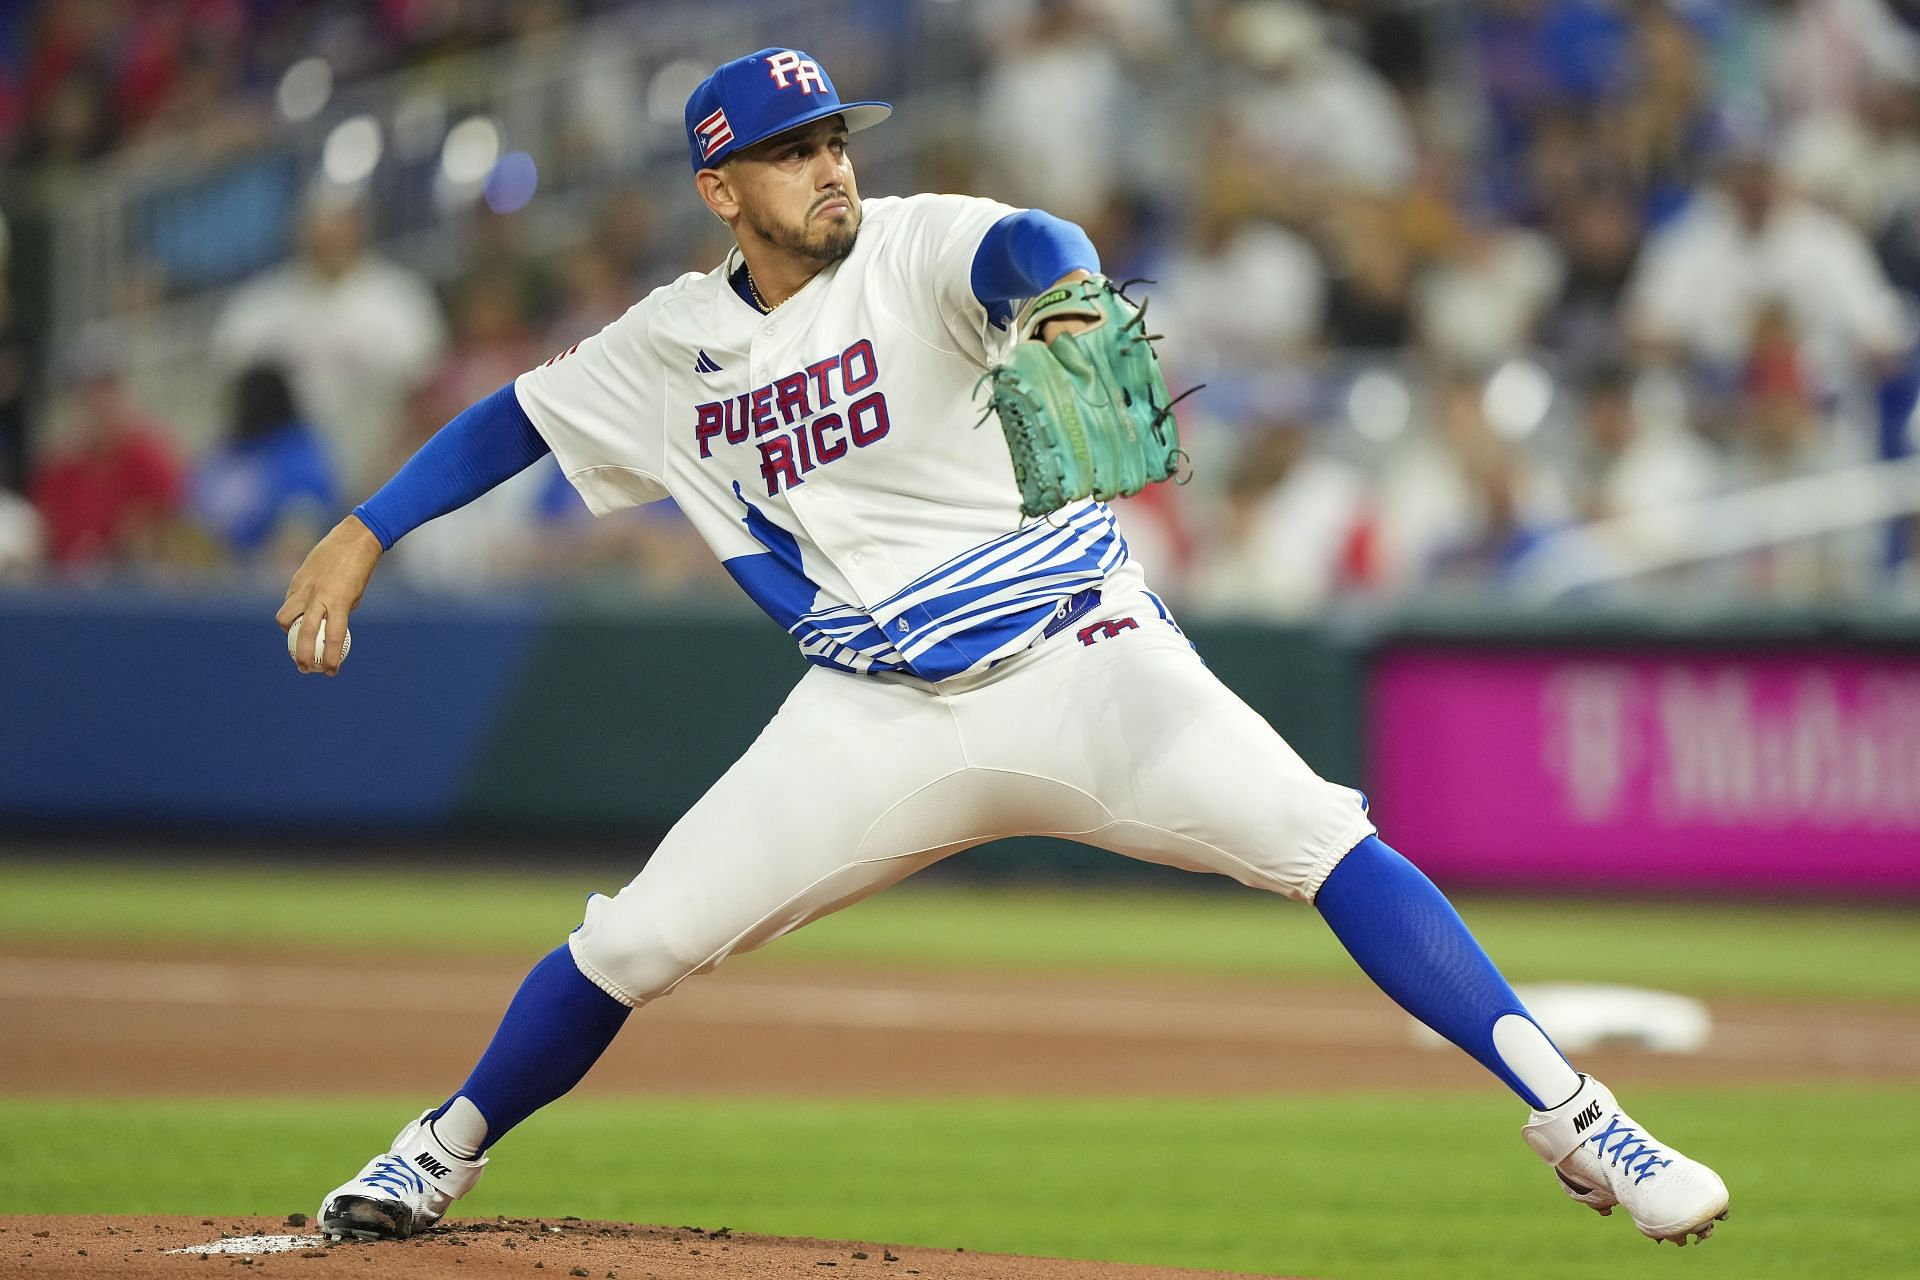 Team Puerto Rico throws first ever perfect game in World Baseball